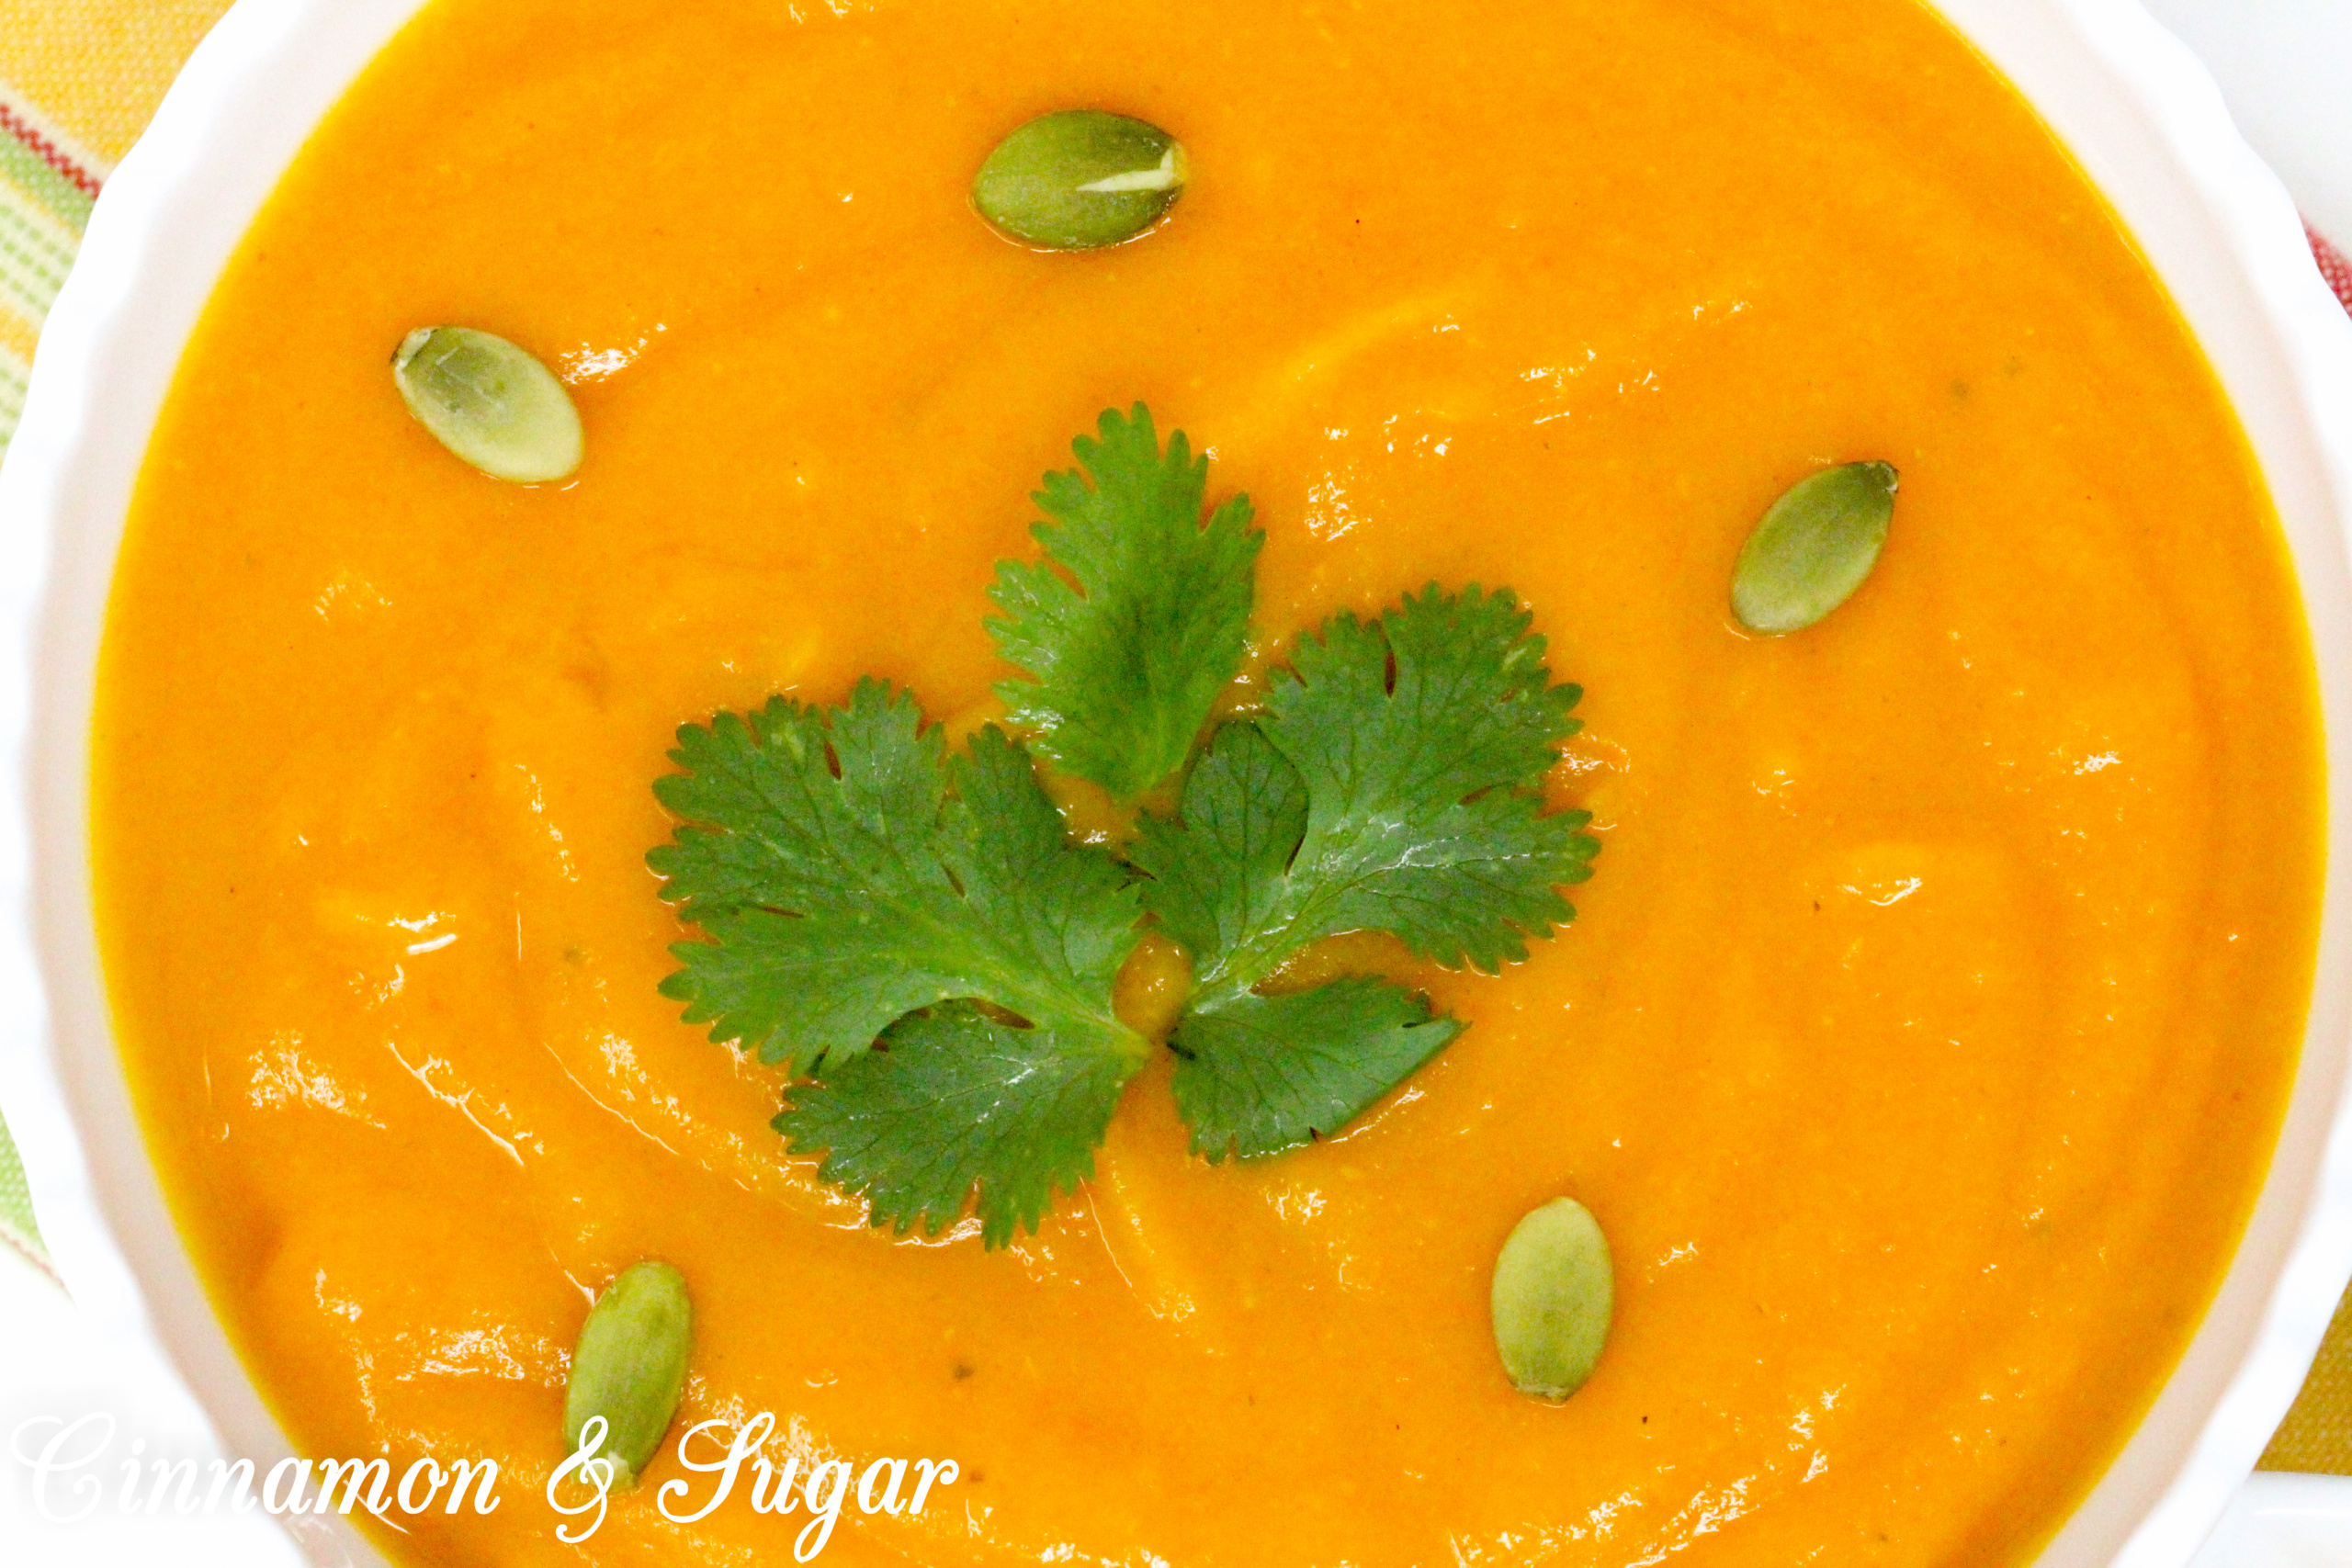 Combining warming spices and the rich-colored hue of sweet potatoes, Curried Sweet Potato Soup is a comforting and nourishing dish. Recipe shared with permission granted by Maureen Klovers, author of OF MASQUES AND MURDER.